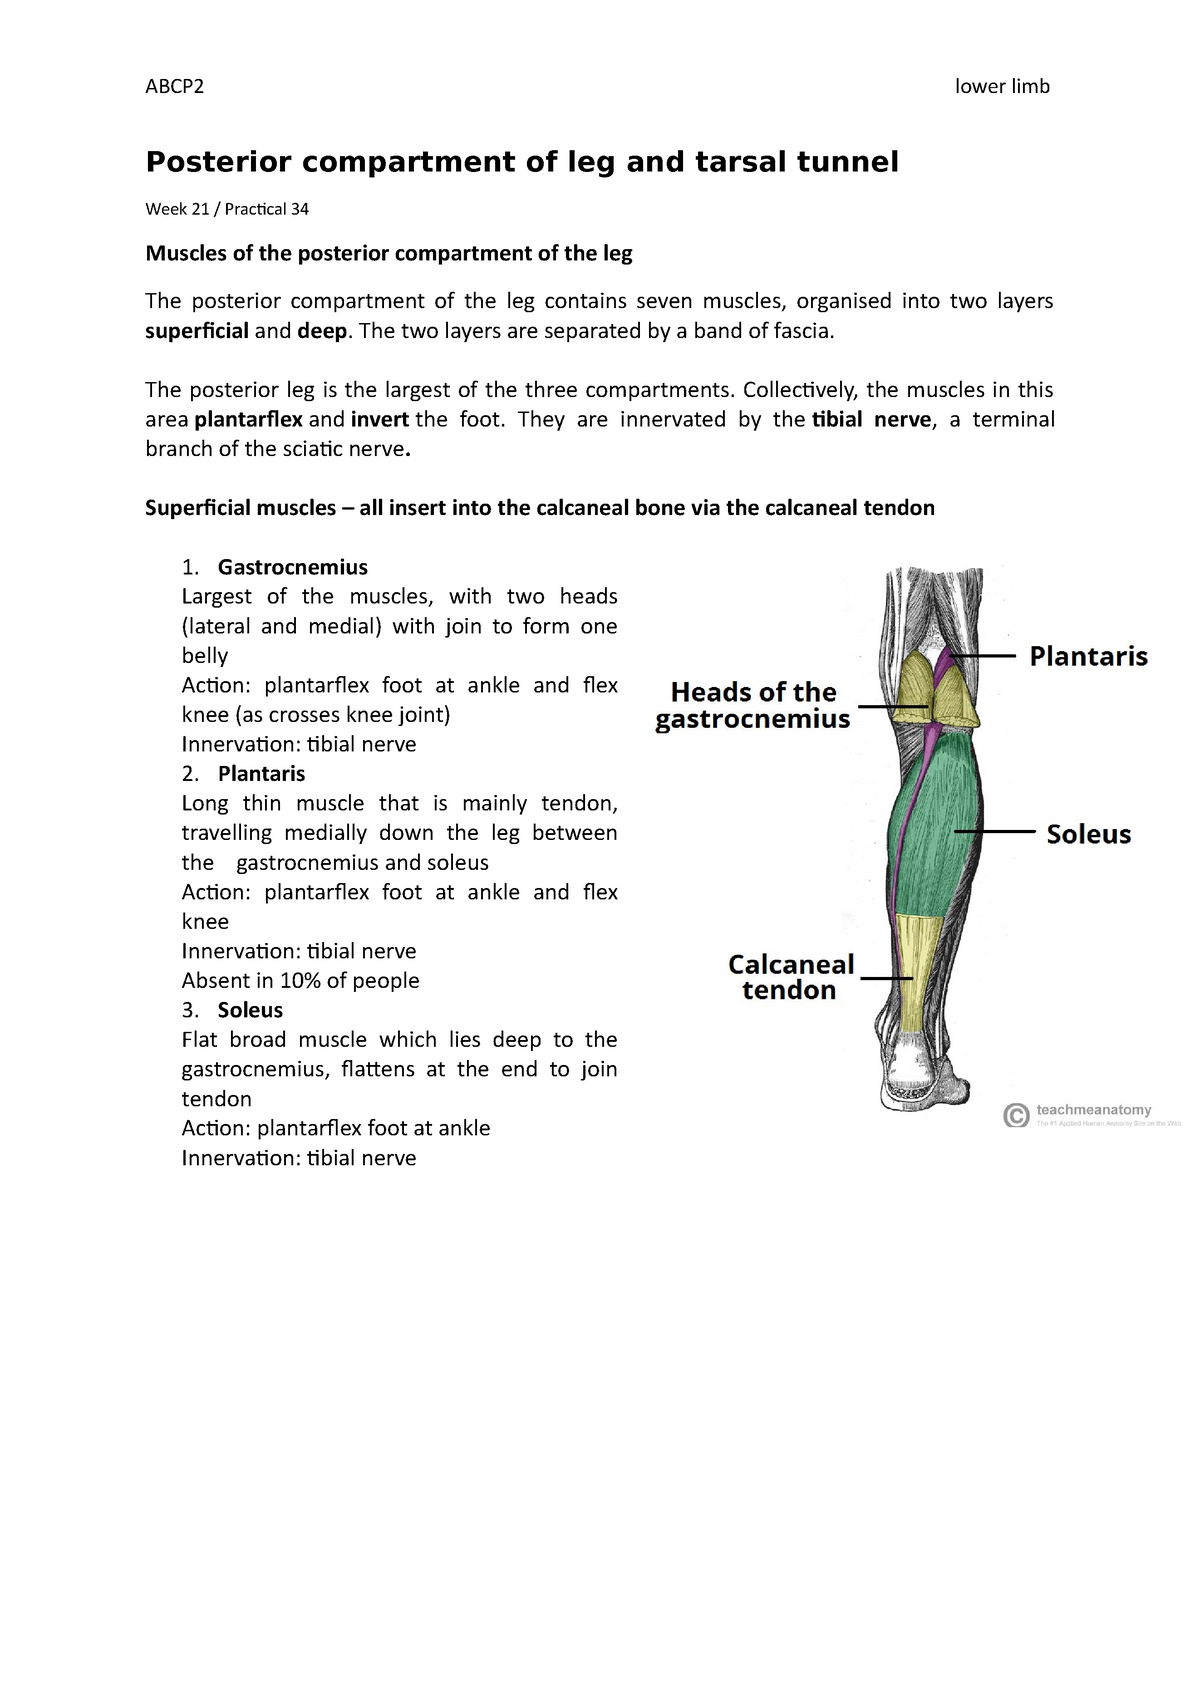 Posterior compartment of leg and tarsal tunnel - The two layers